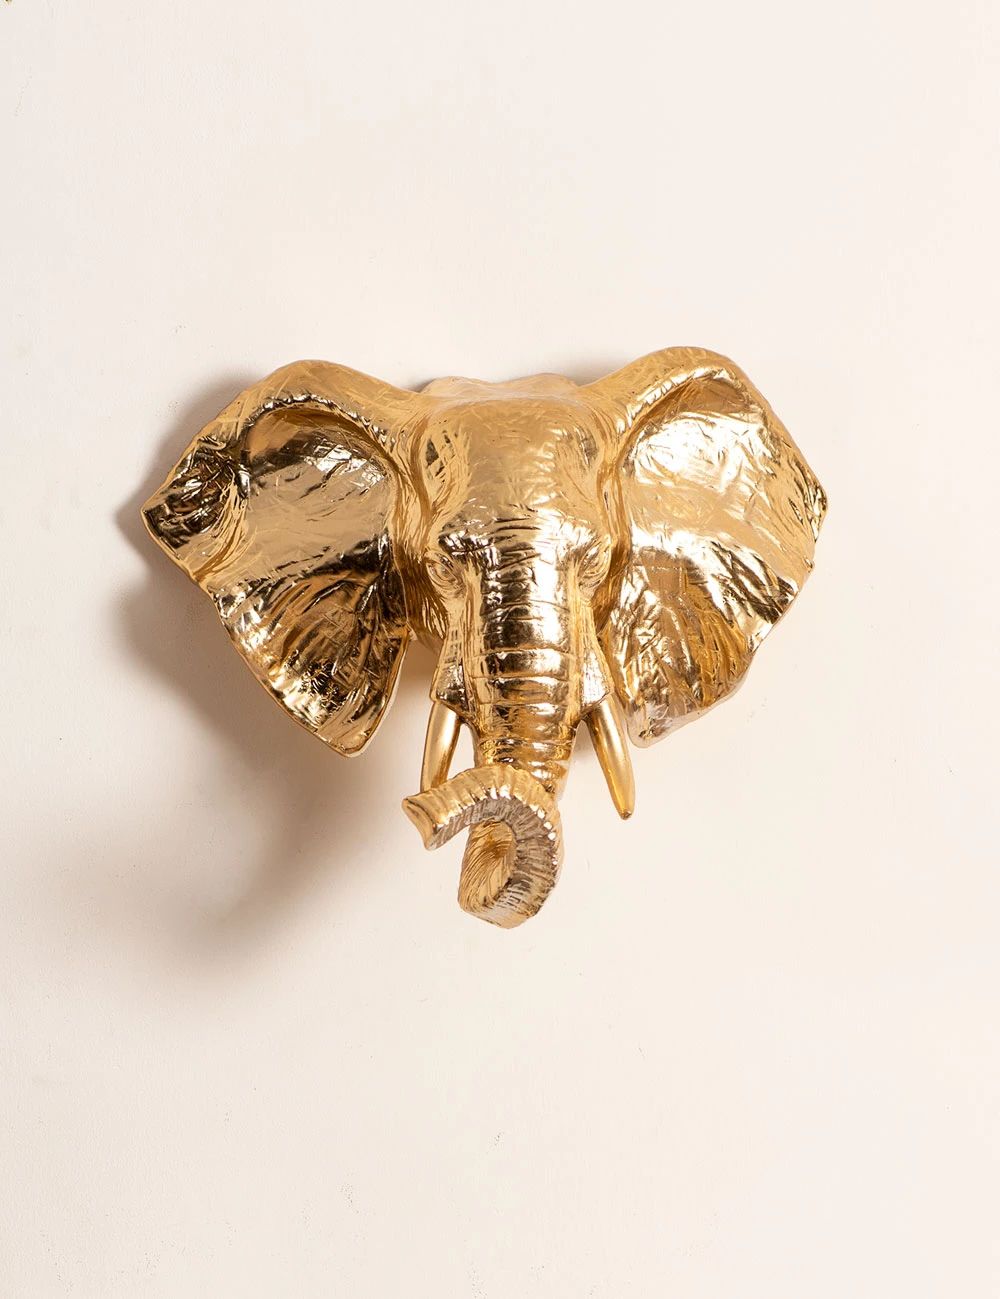 Gold Elephants Sculpture Wall Décor Within Most Current Wall Mounted Gold Elephant Sculpture (View 6 of 20)